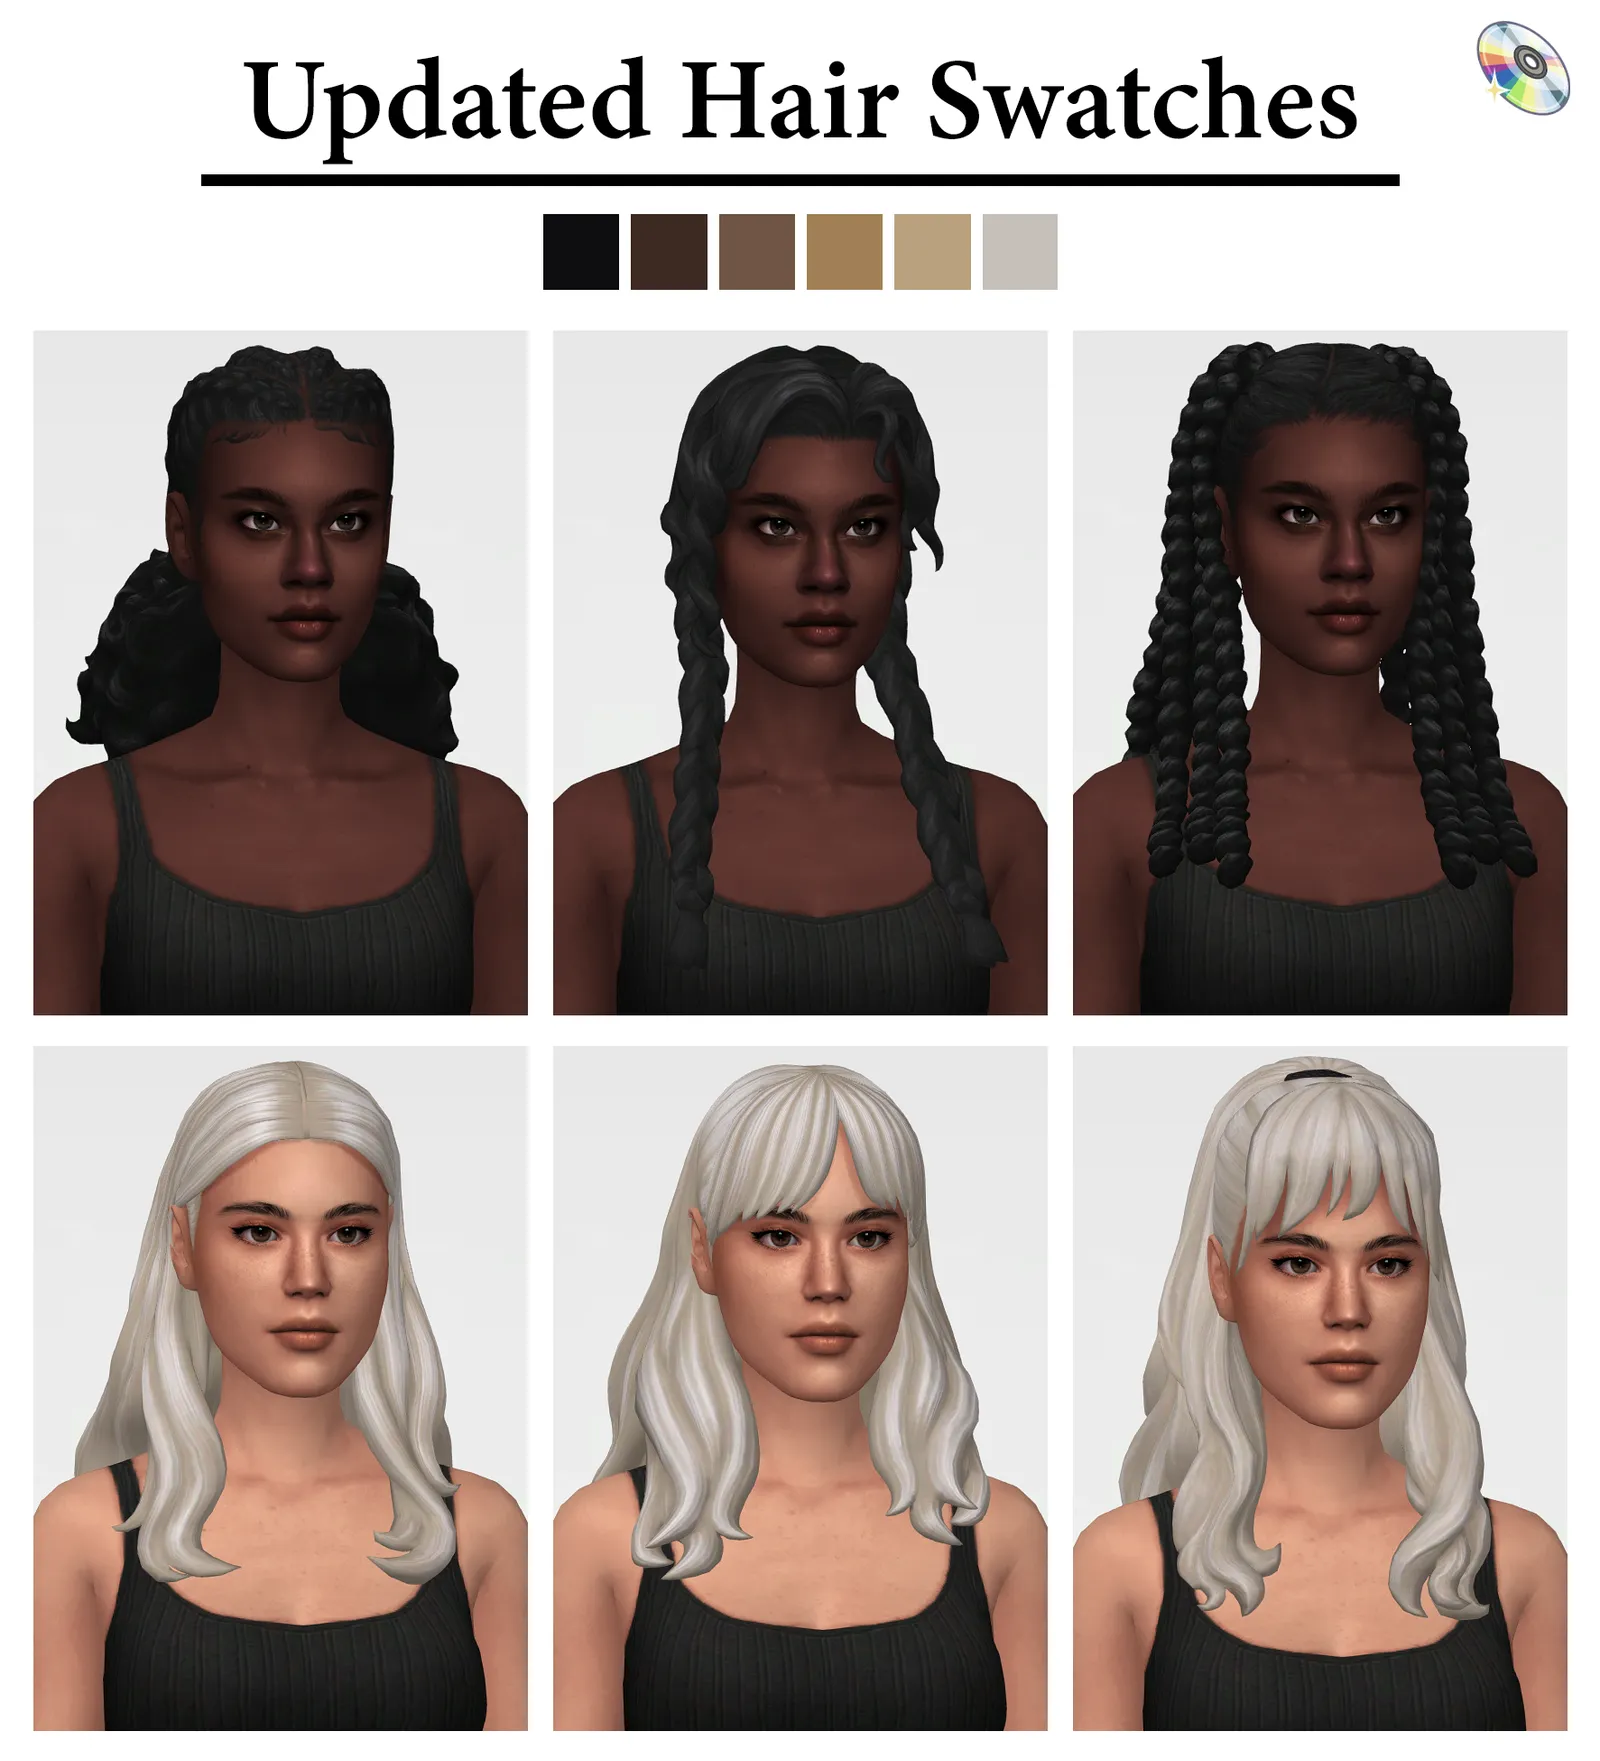 Updated Hair Swatches: